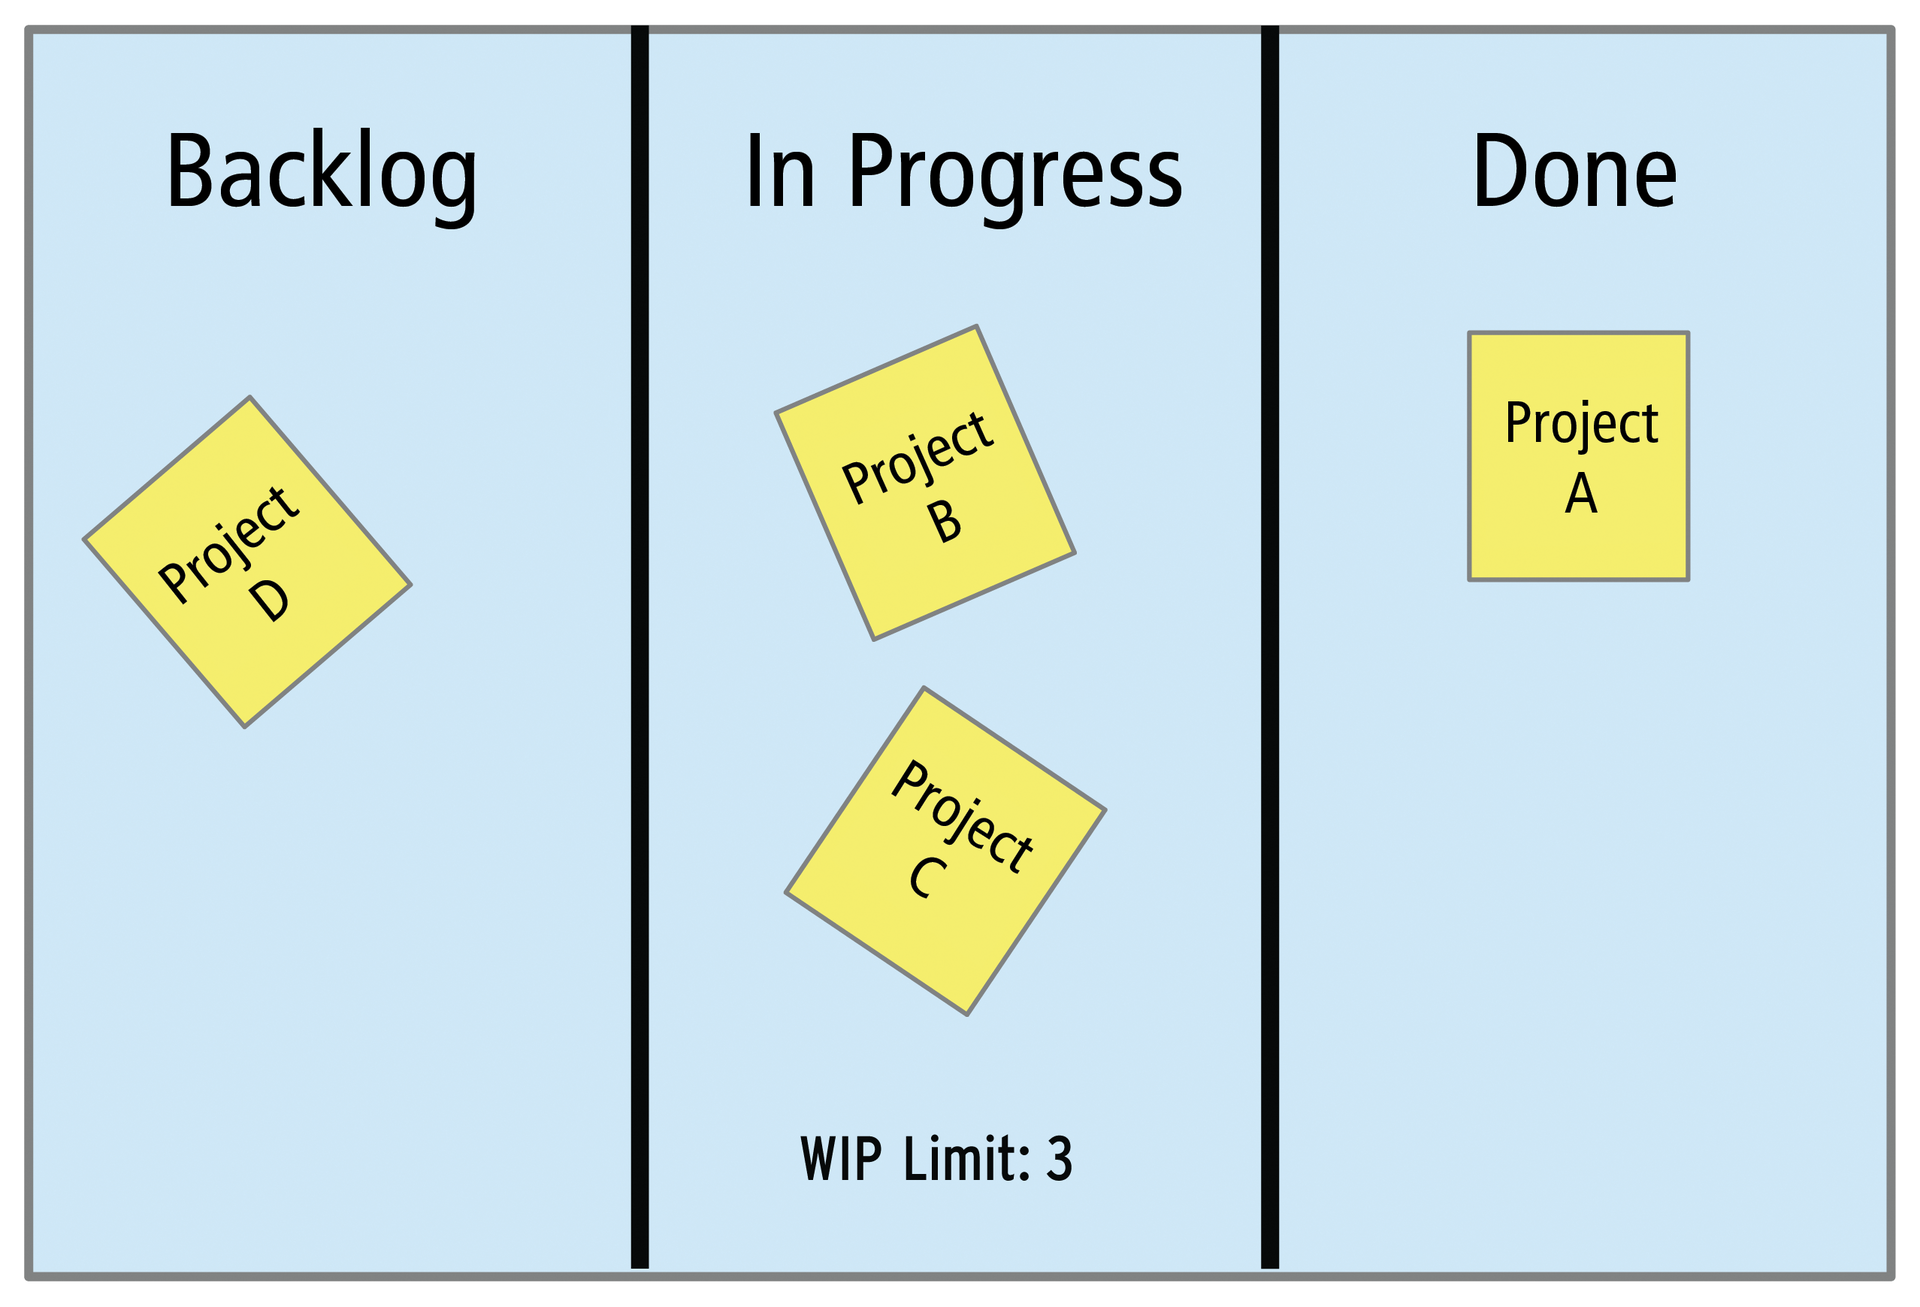 On the Kanban board, each process step is represented by its own column. The projects move from left to right. 